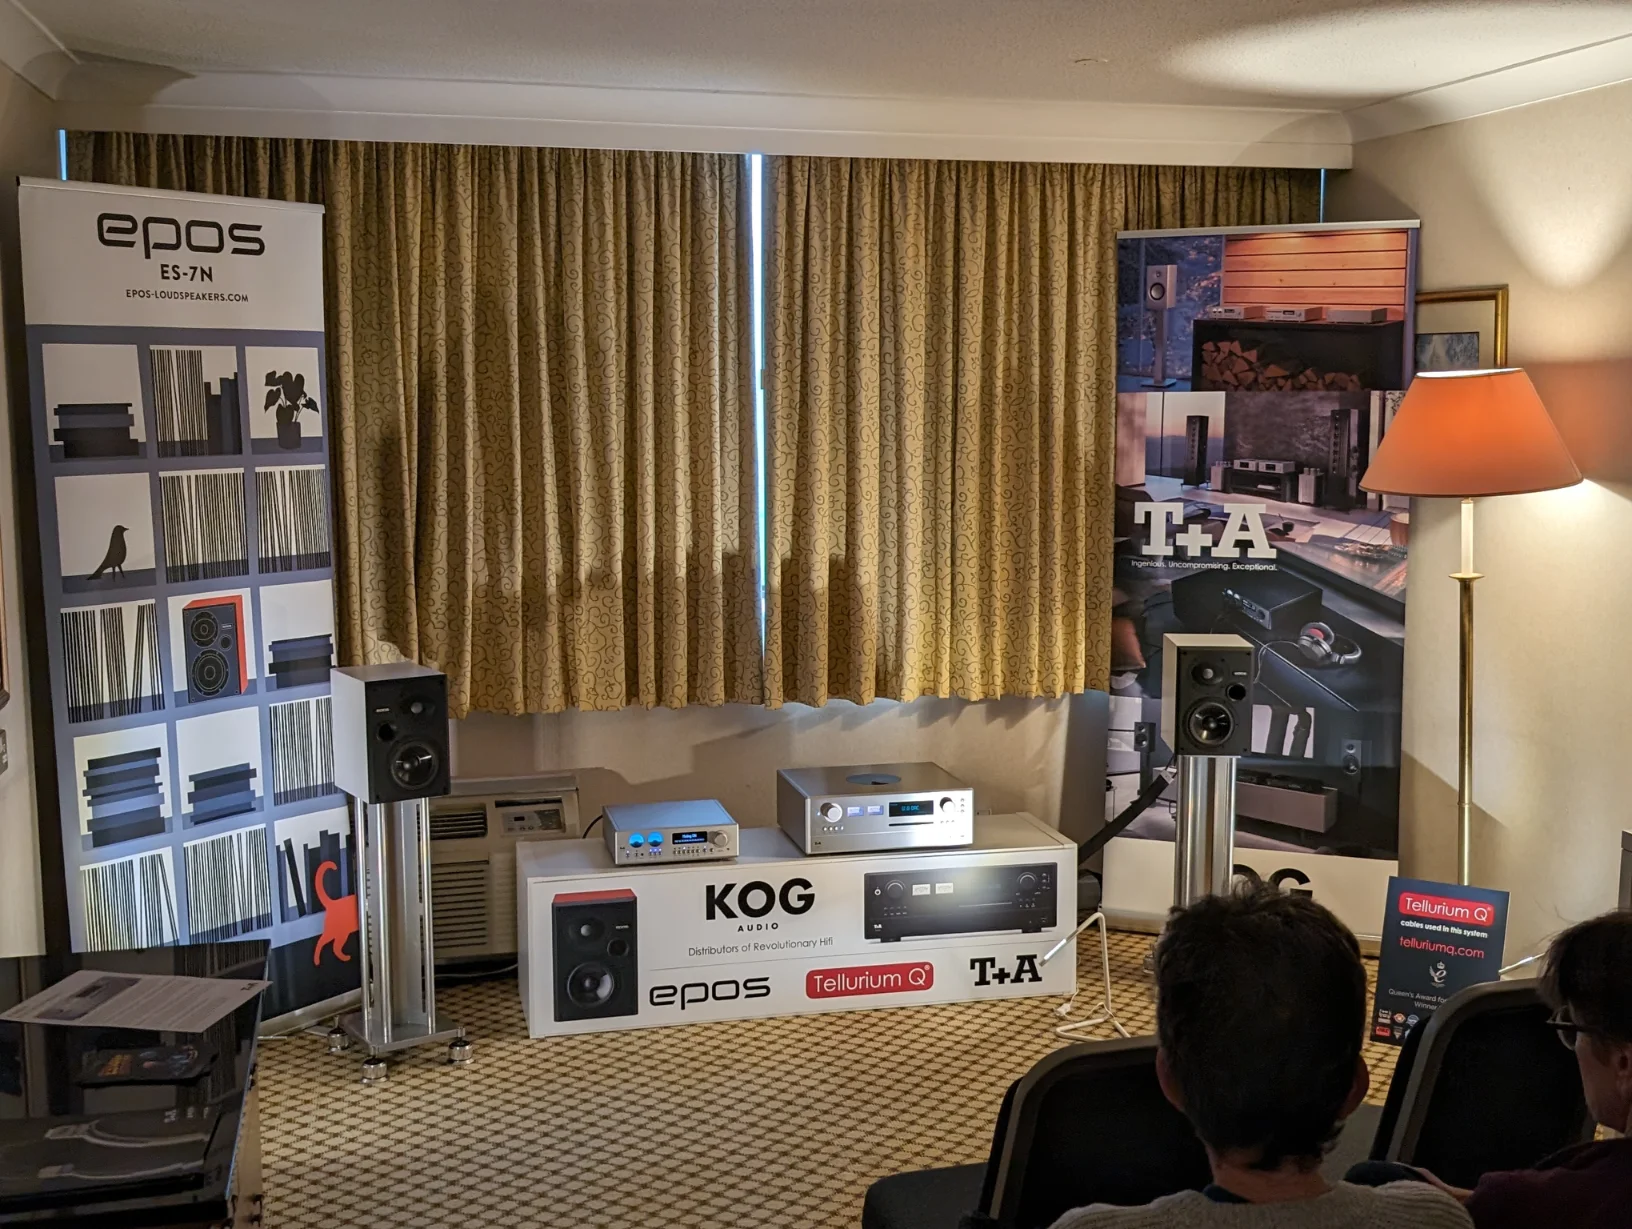 Regrettably a room we could only poke our head into. The new all-in-one system from T+A is bound to be a winner. The DAC 200 and AMP 200 is a great solution, if this is a bigger brother to the 200 series they’re no doubt onto another winner.